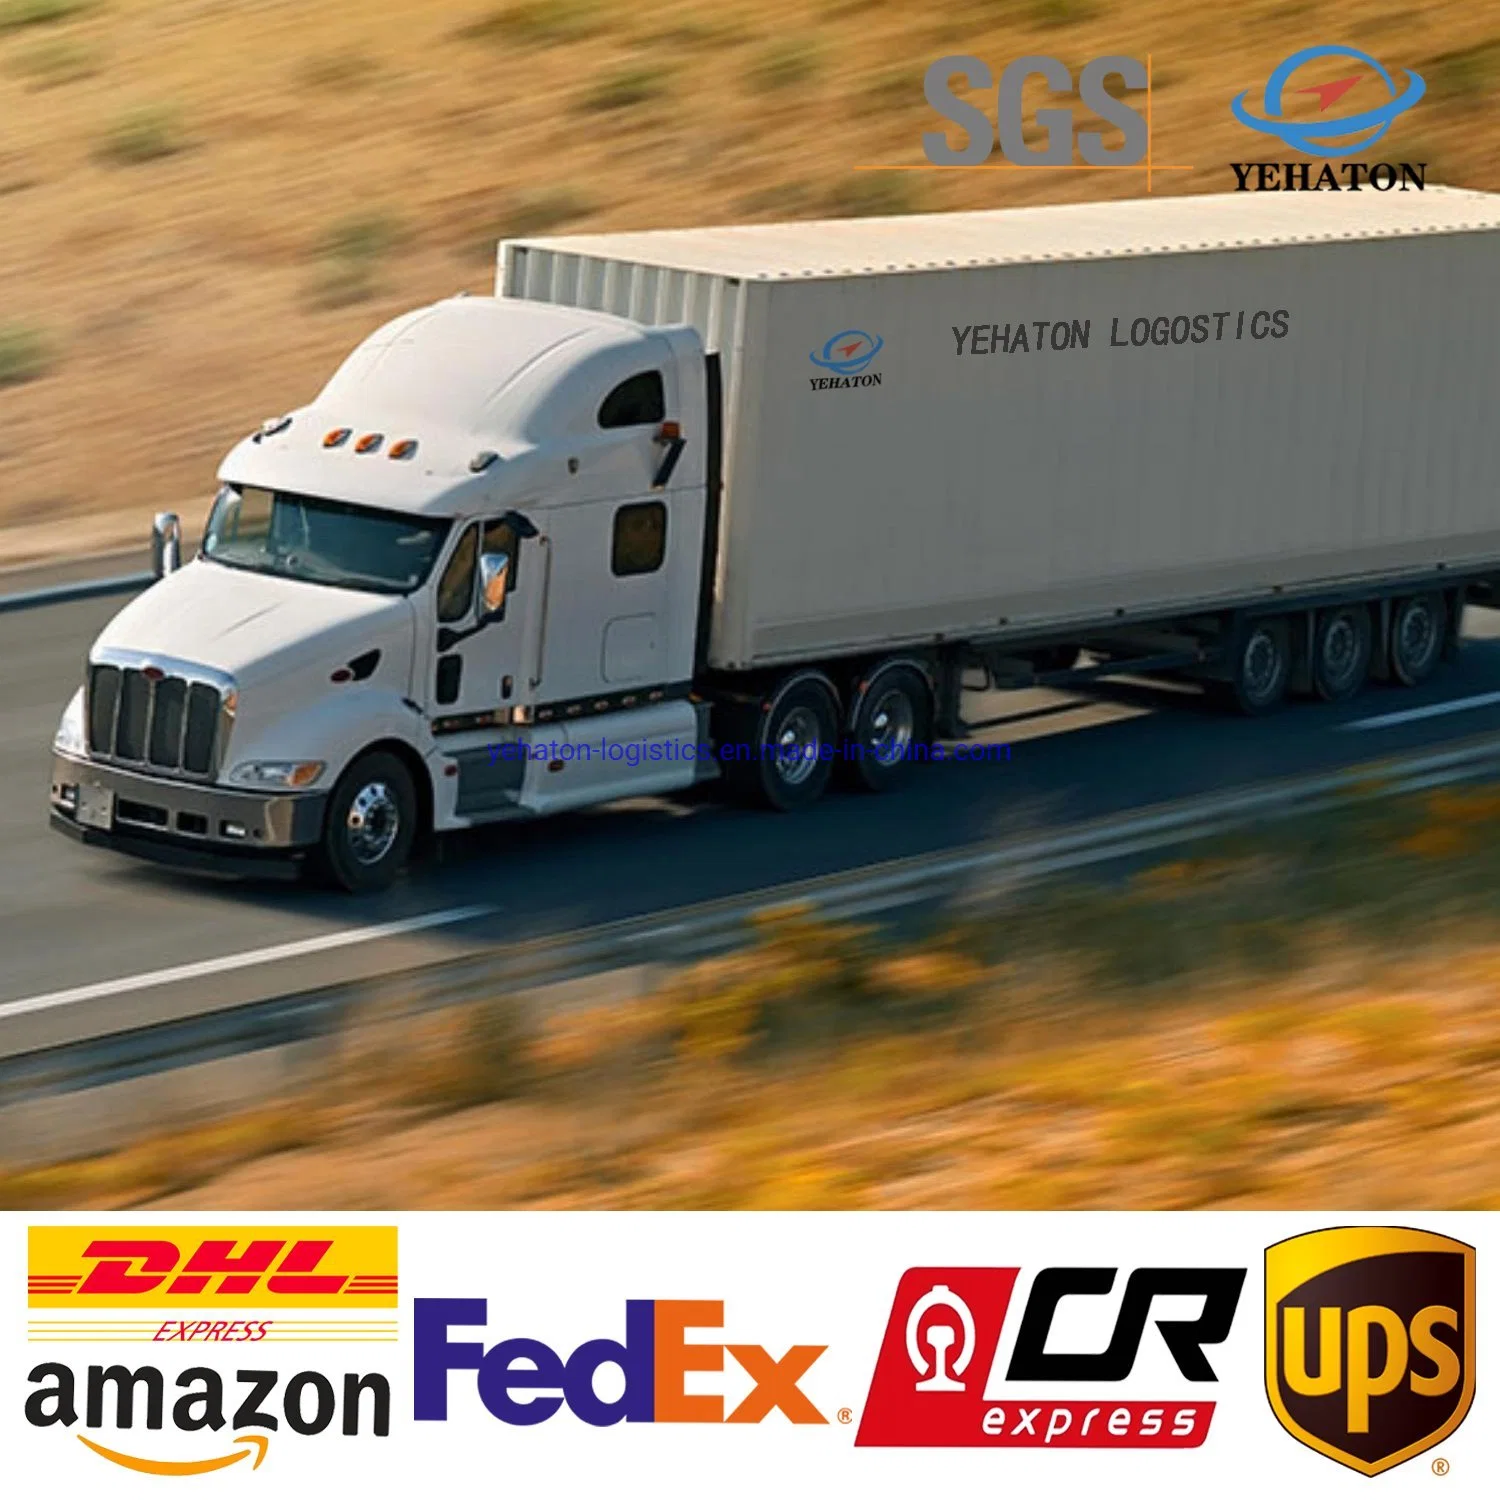 Professional International Transportation Cargo Logistics Agent Freight Forwarder, Experienced Truck/Air/Sea/Express Shipping Service to France Us UK Europe